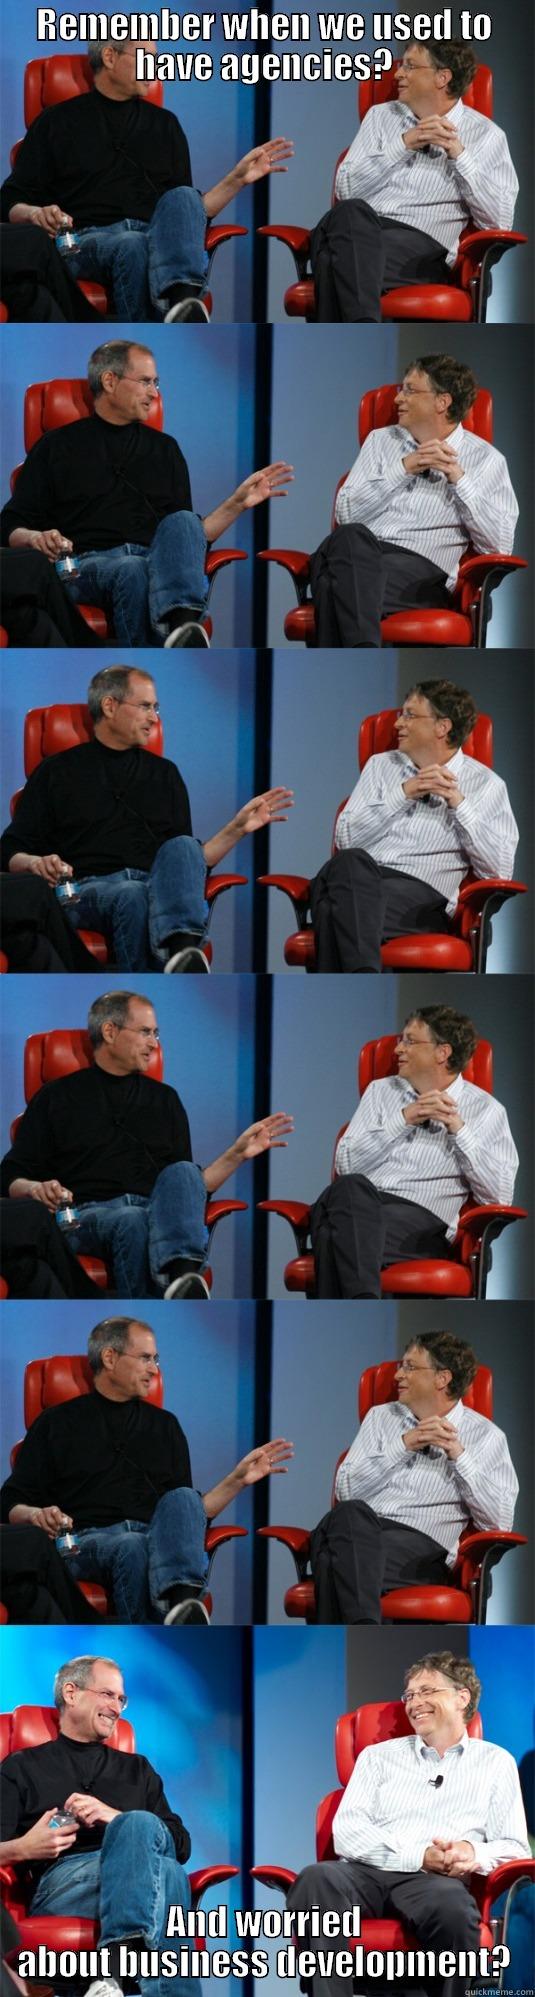 Catchy title - REMEMBER WHEN WE USED TO HAVE AGENCIES? AND WORRIED ABOUT BUSINESS DEVELOPMENT? Steve Jobs vs Bill Gates